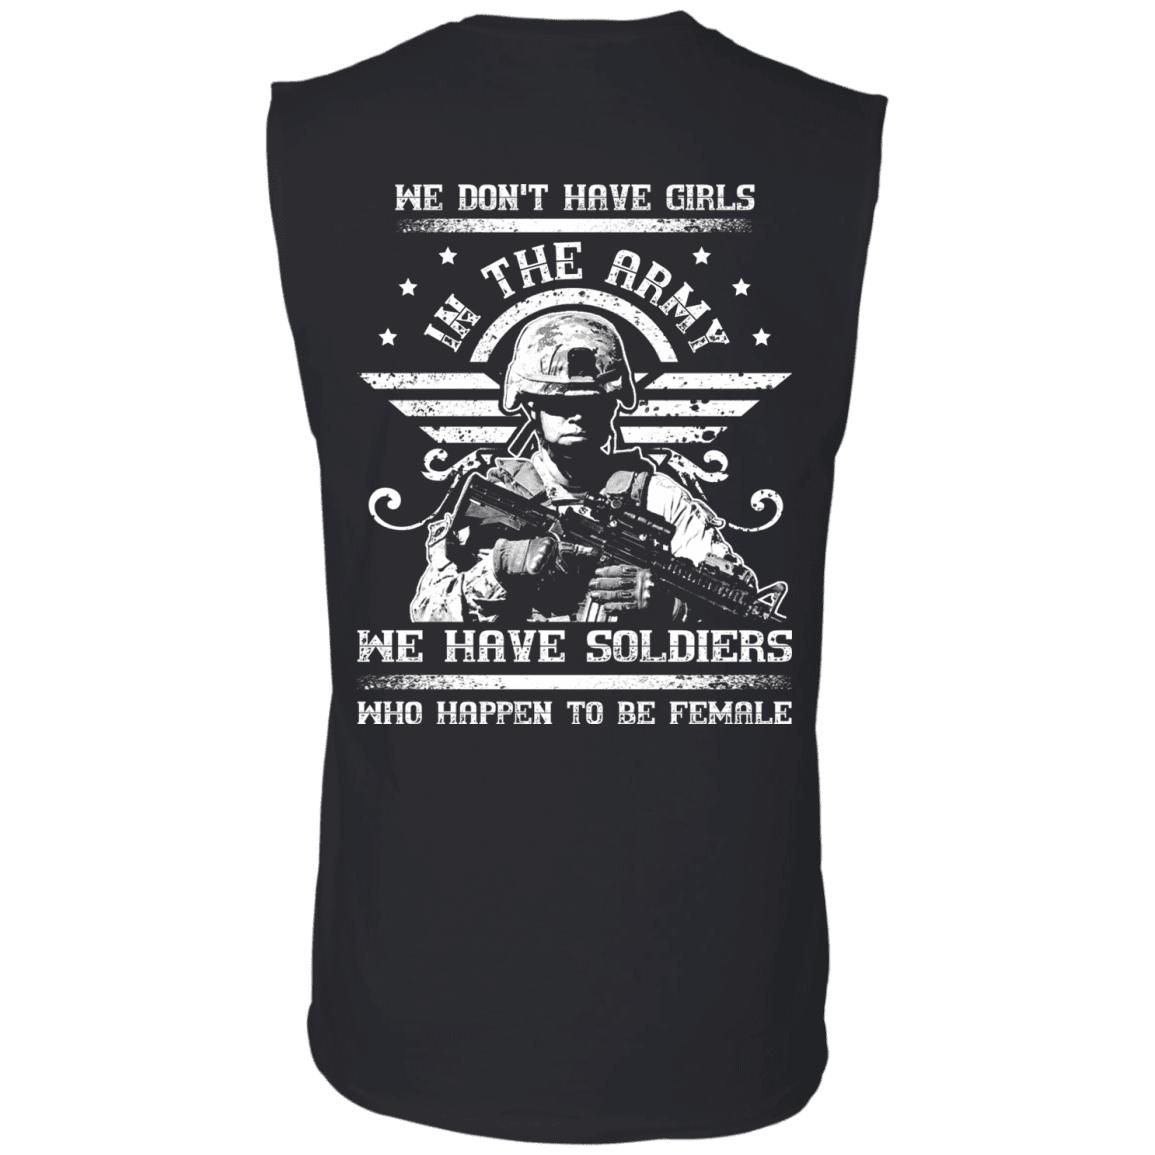 We have Female Soldiers In The Army Back T Shirts-TShirt-Army-Veterans Nation